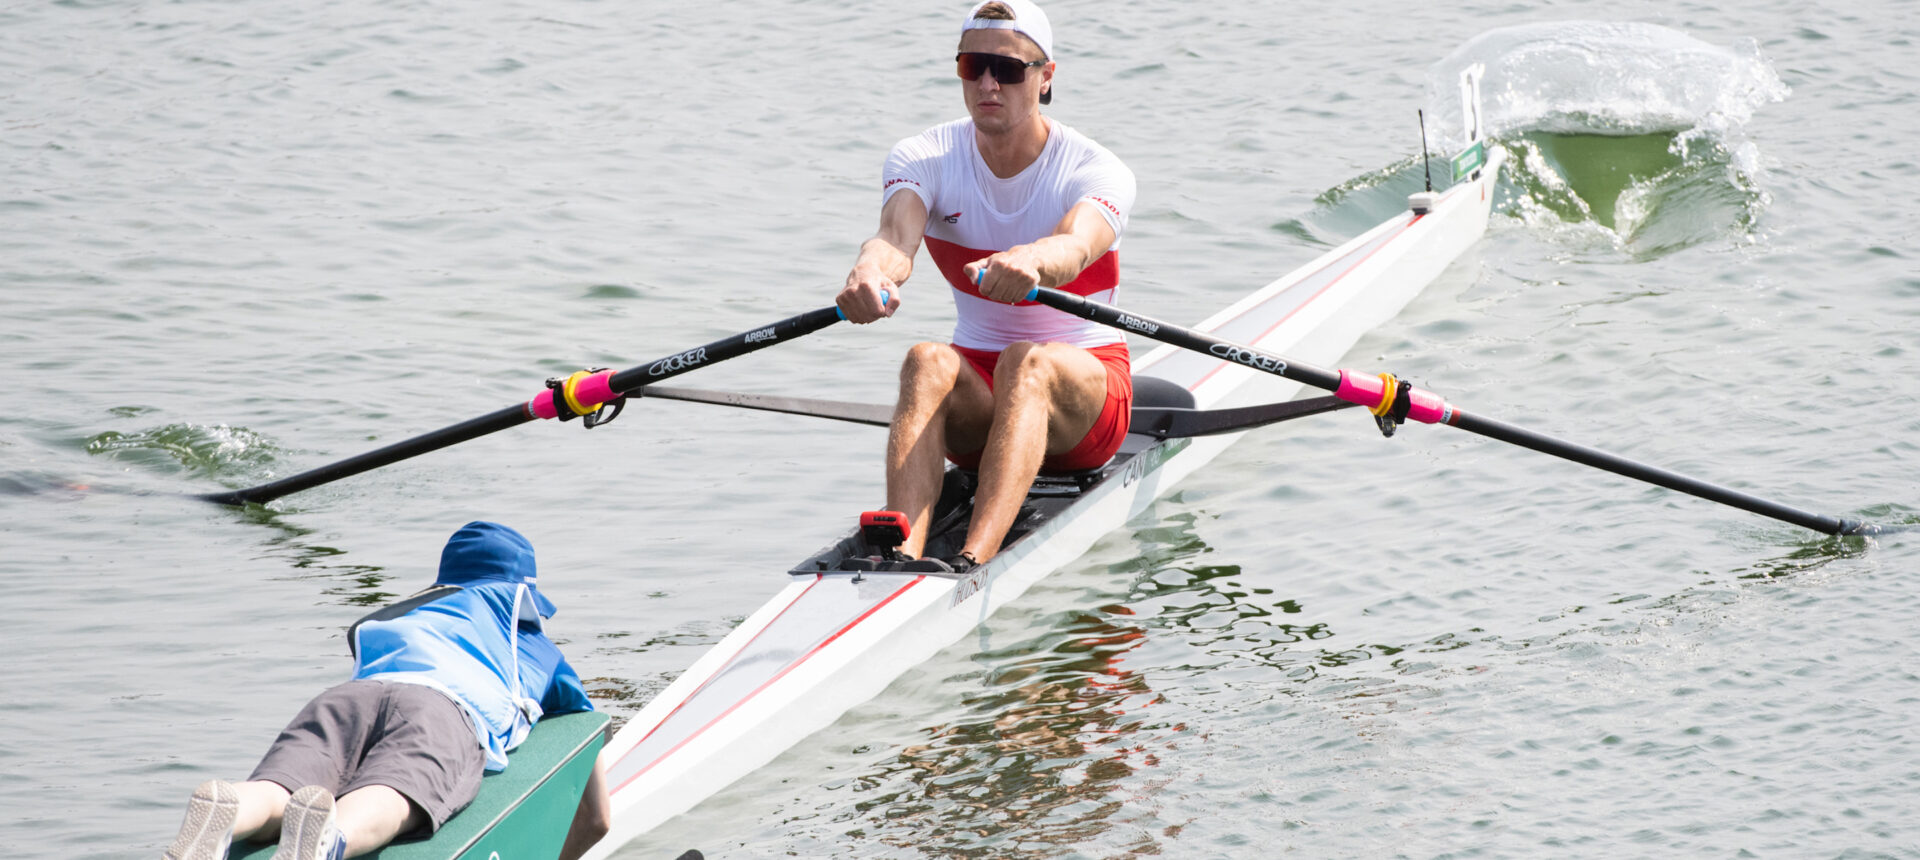 Strong first day of racing for Canada in Tokyo